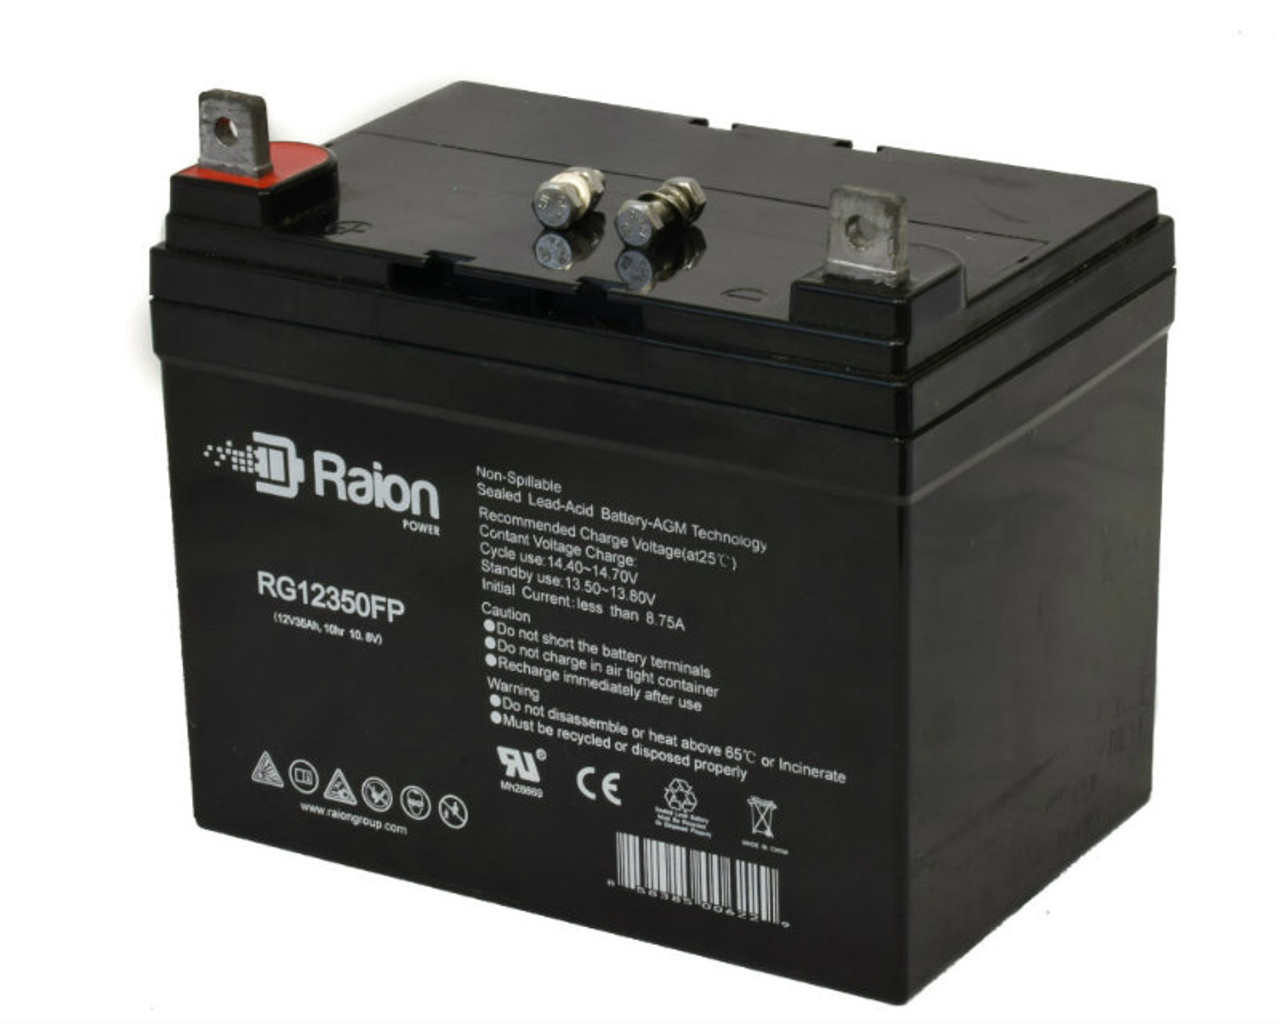 Raion Power Replacement 12V 35Ah RG12350FP Battery for Great Dane SURFER LINE